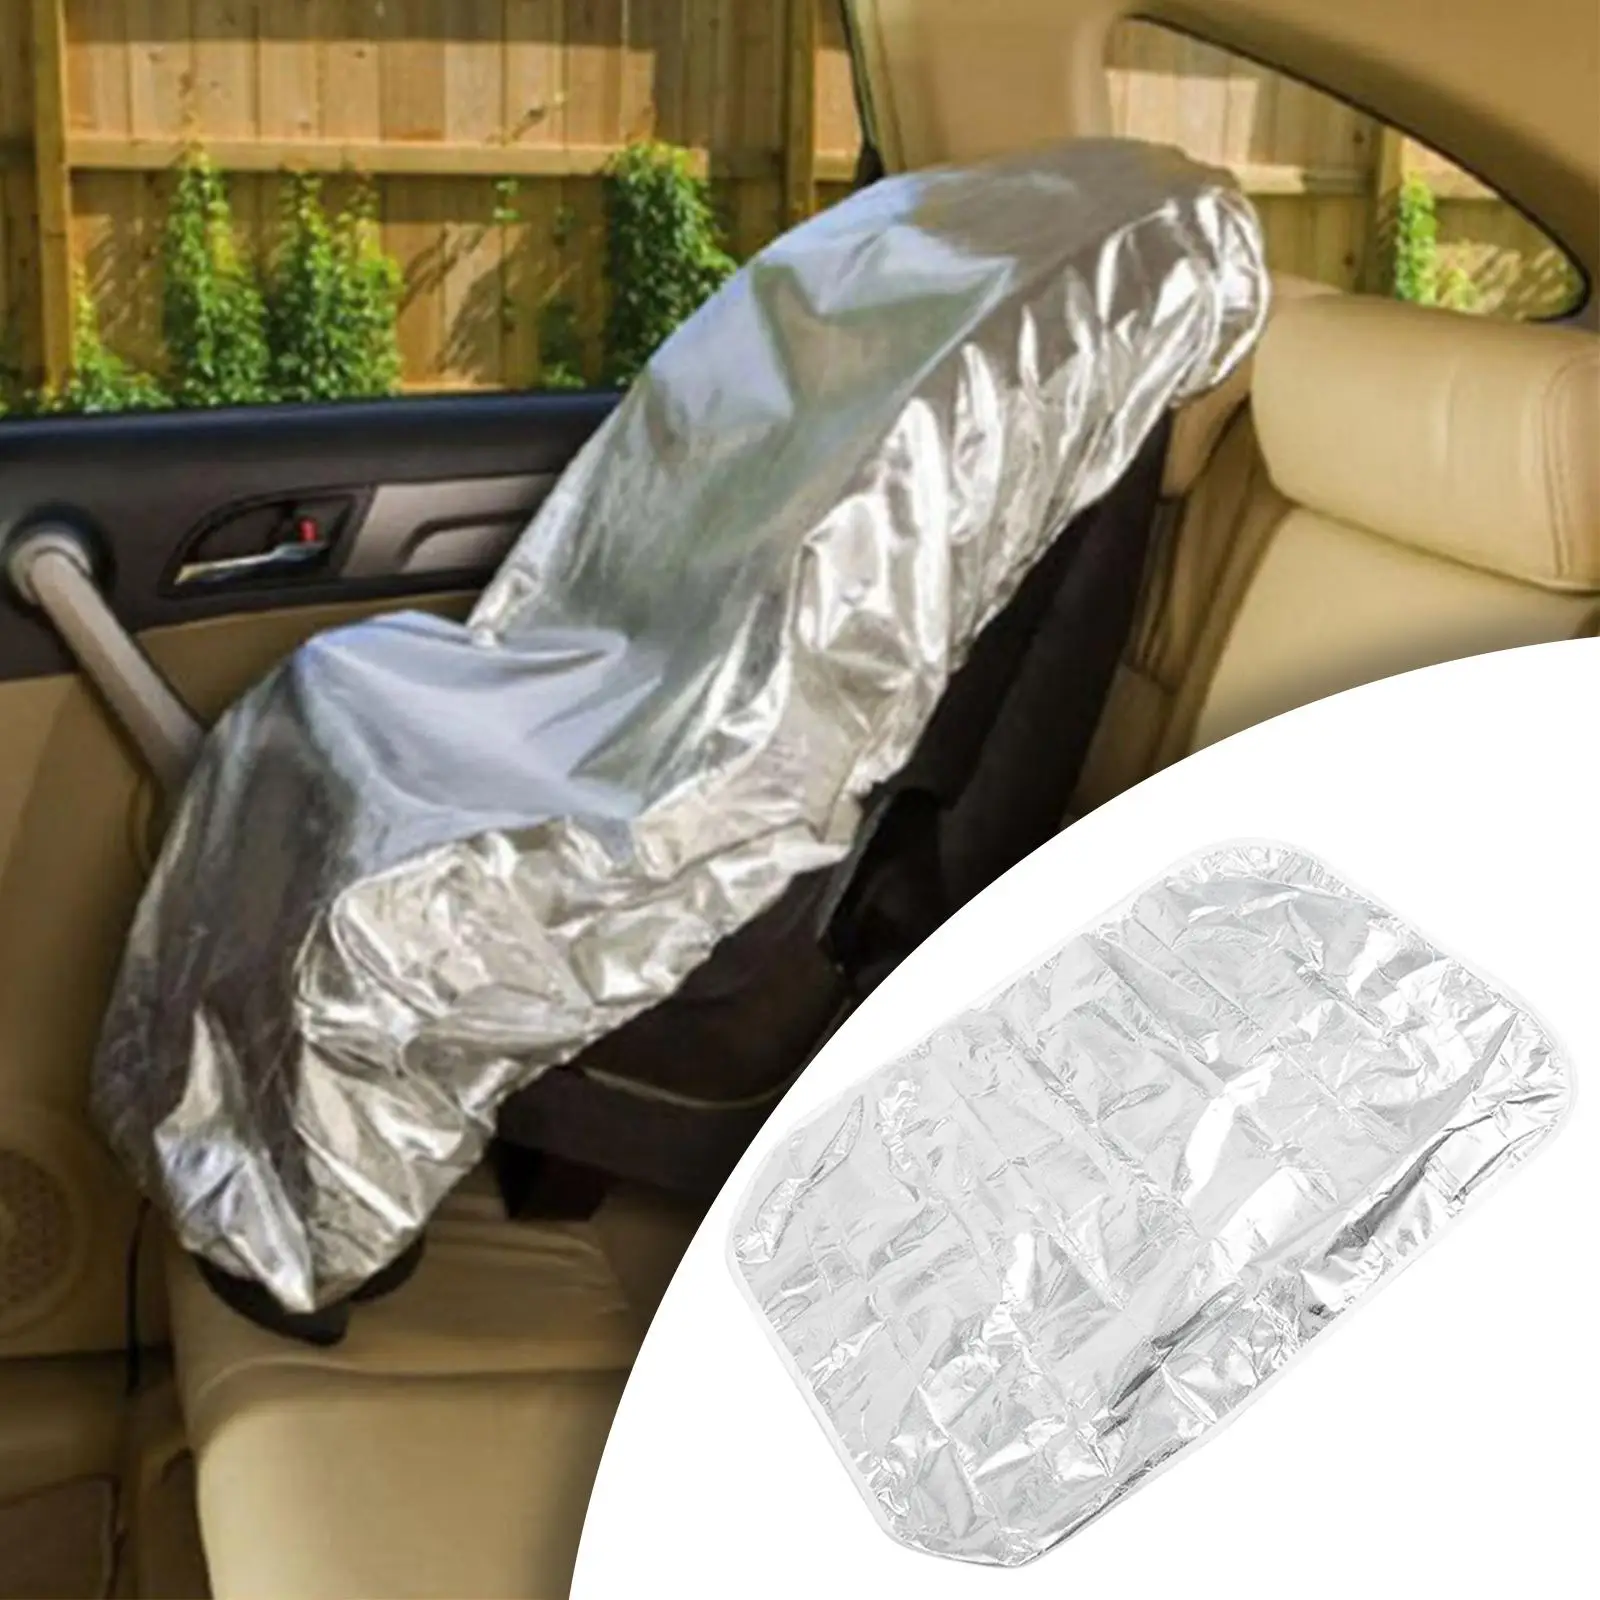 Auto Safety Seat Sun Shade Cover UV Protection Adjustable Durable Silver Protection Fit for Children Stroller Kids Keep Cool